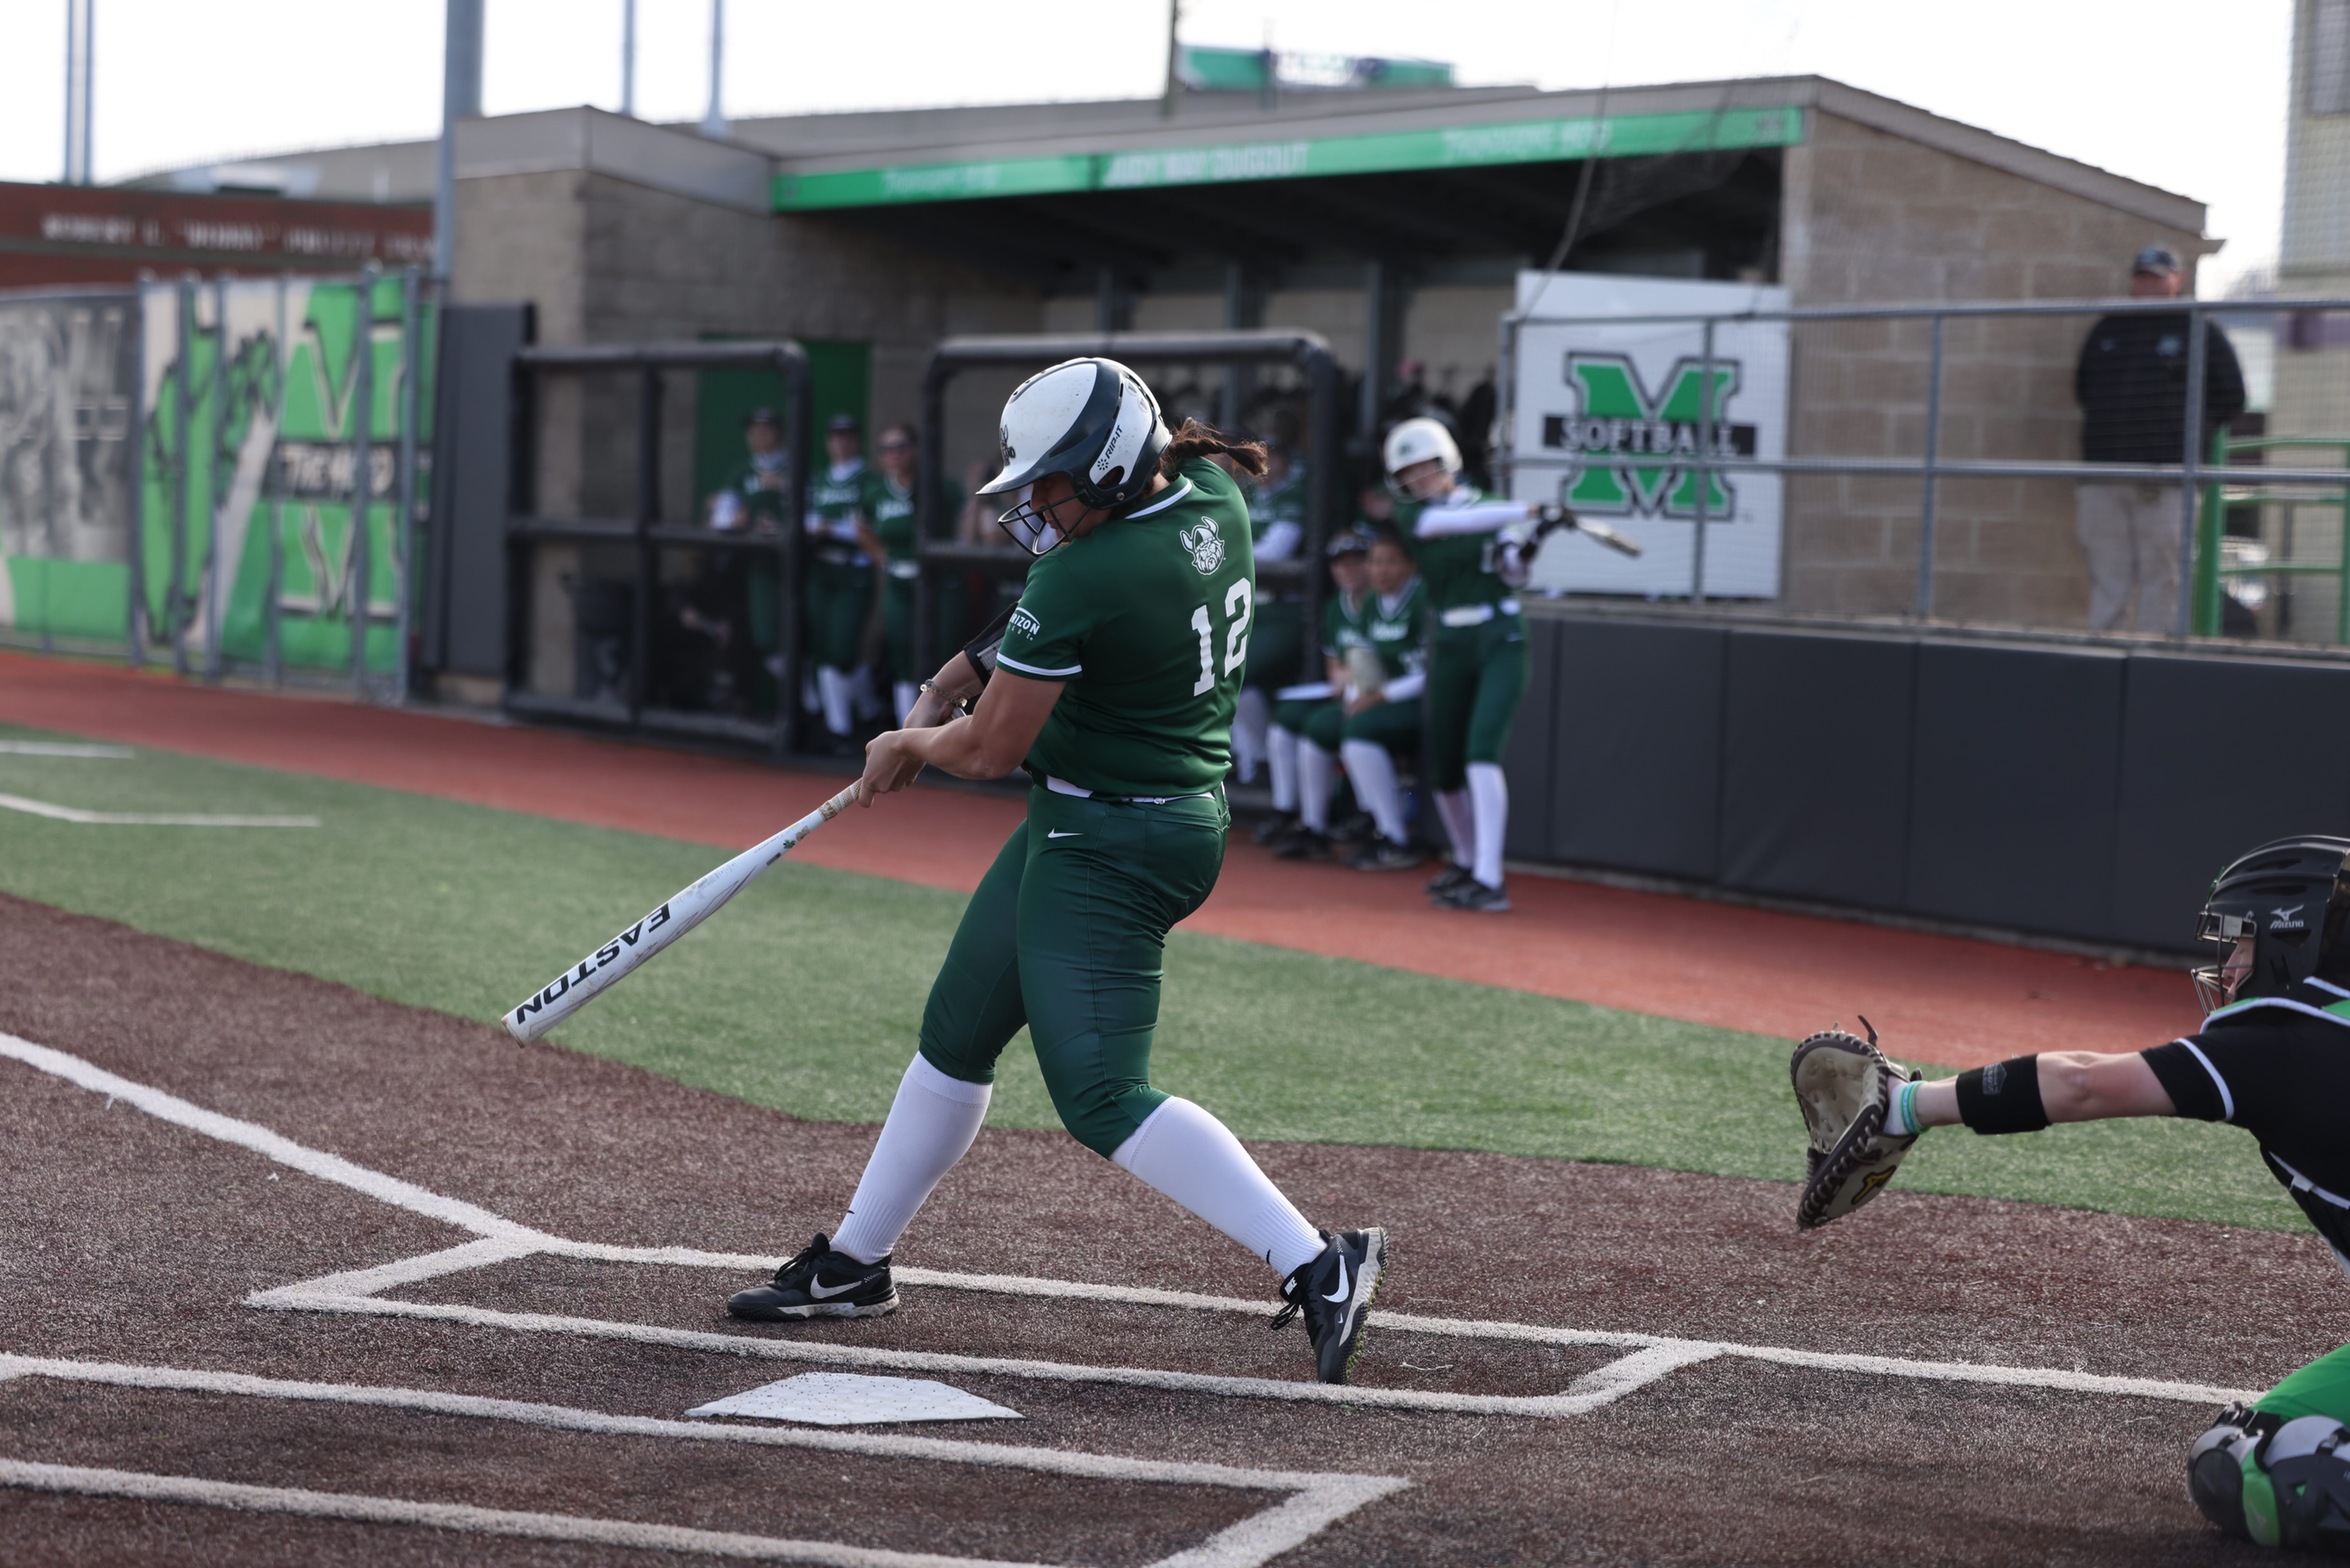 Cleveland State Softball Falls to Marshall in Opening Game of Weekend